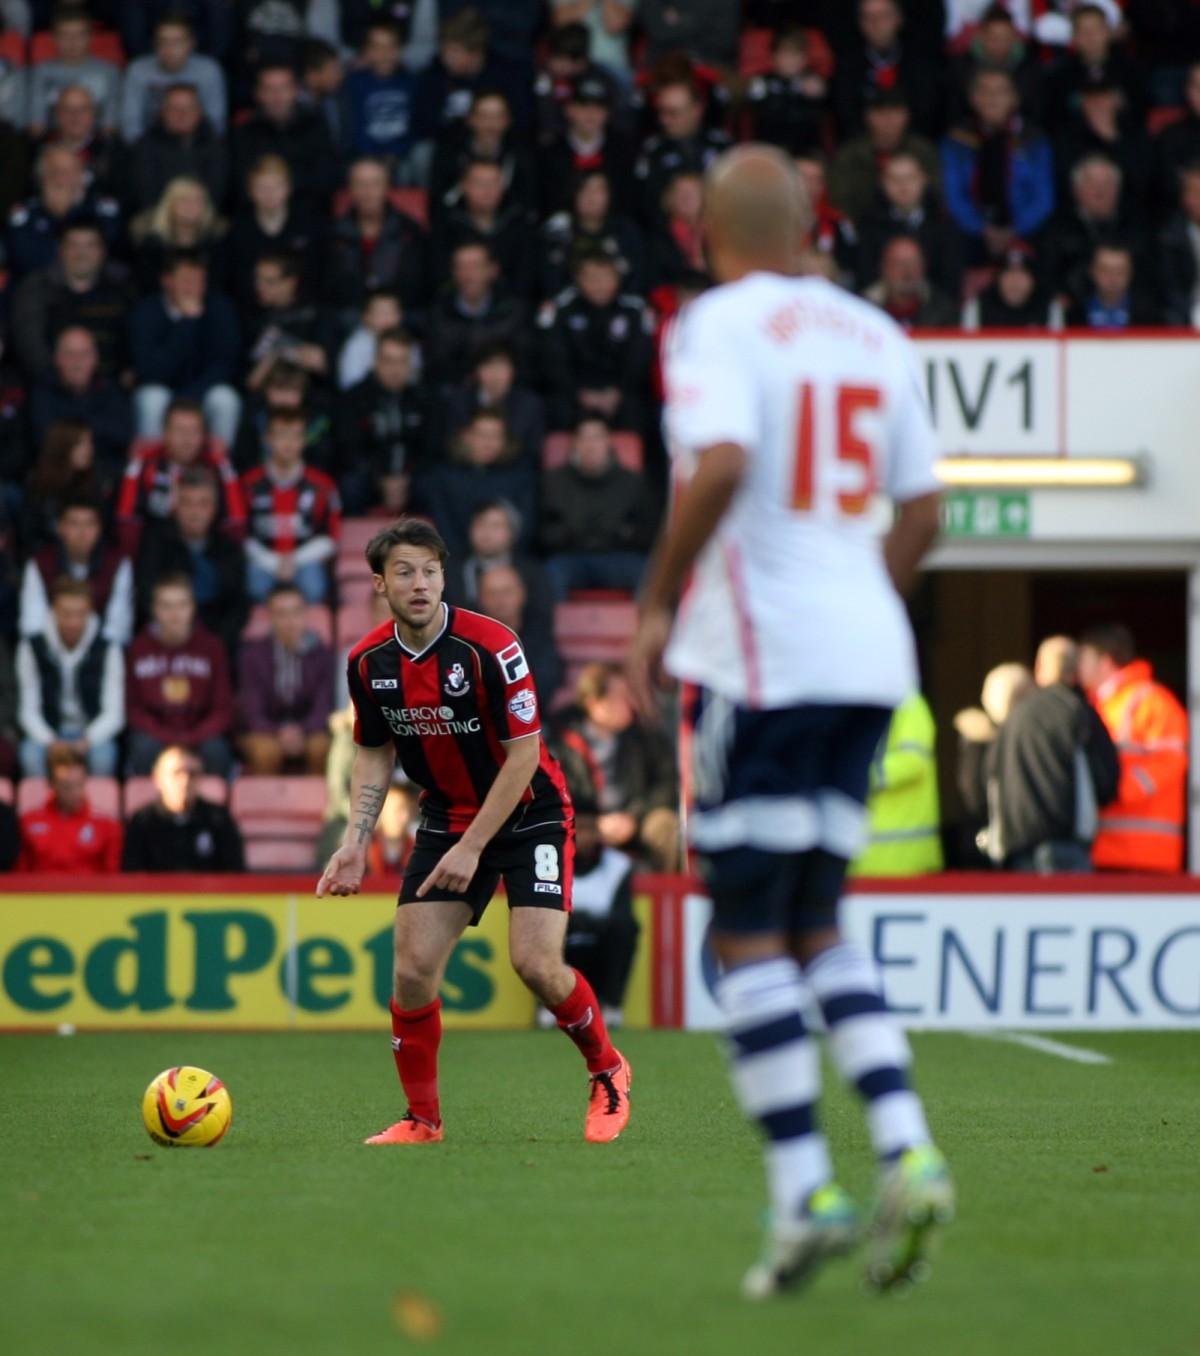 All our pictures of AFC Bournemouth v Bolton Wanderers at the Goldsands Stadium on Saturday, 2nd November, 2013